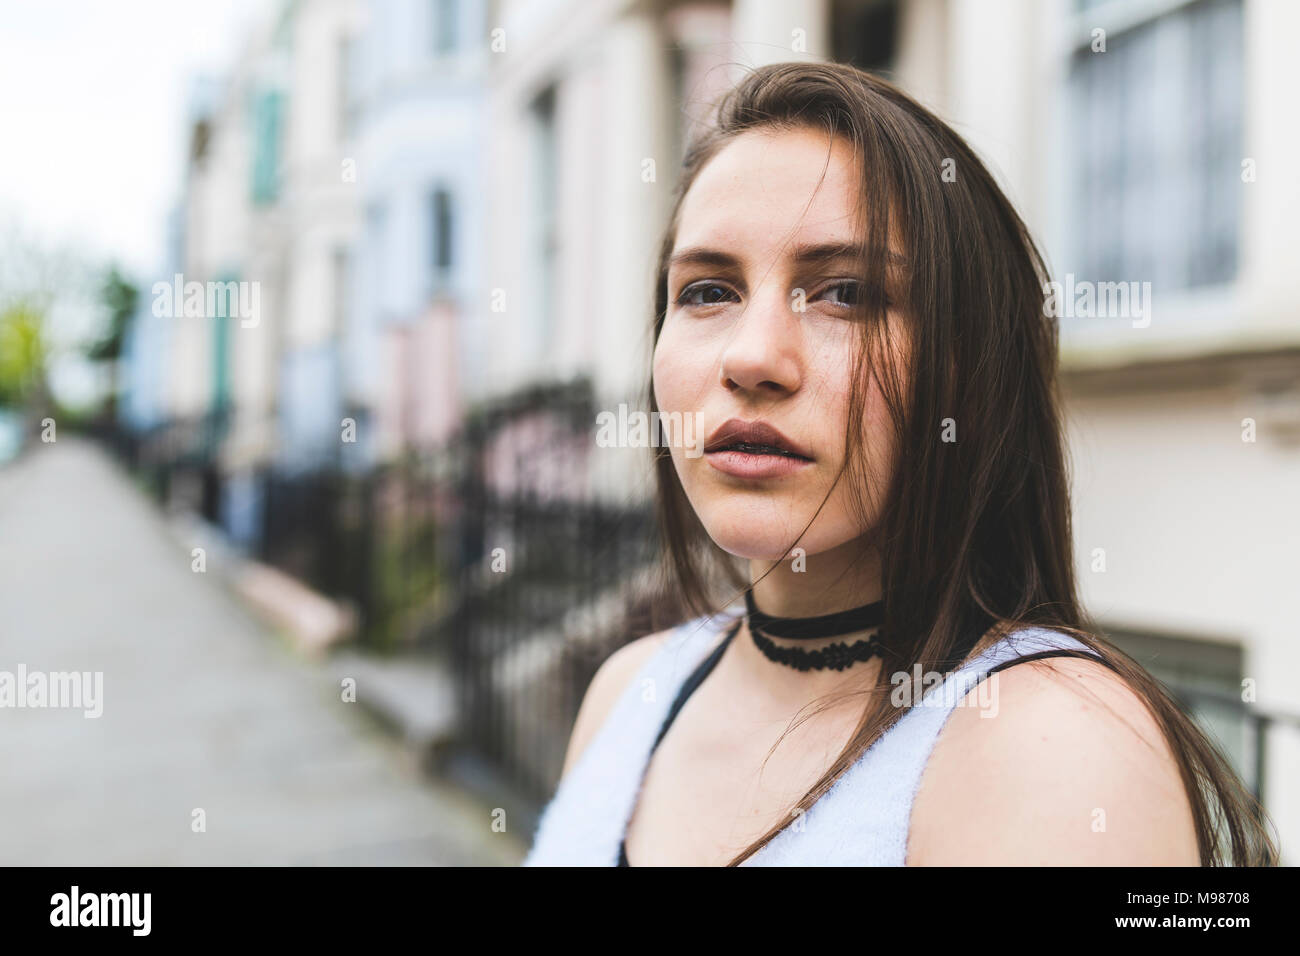 Portrait of teenage girl in the city Stock Photo